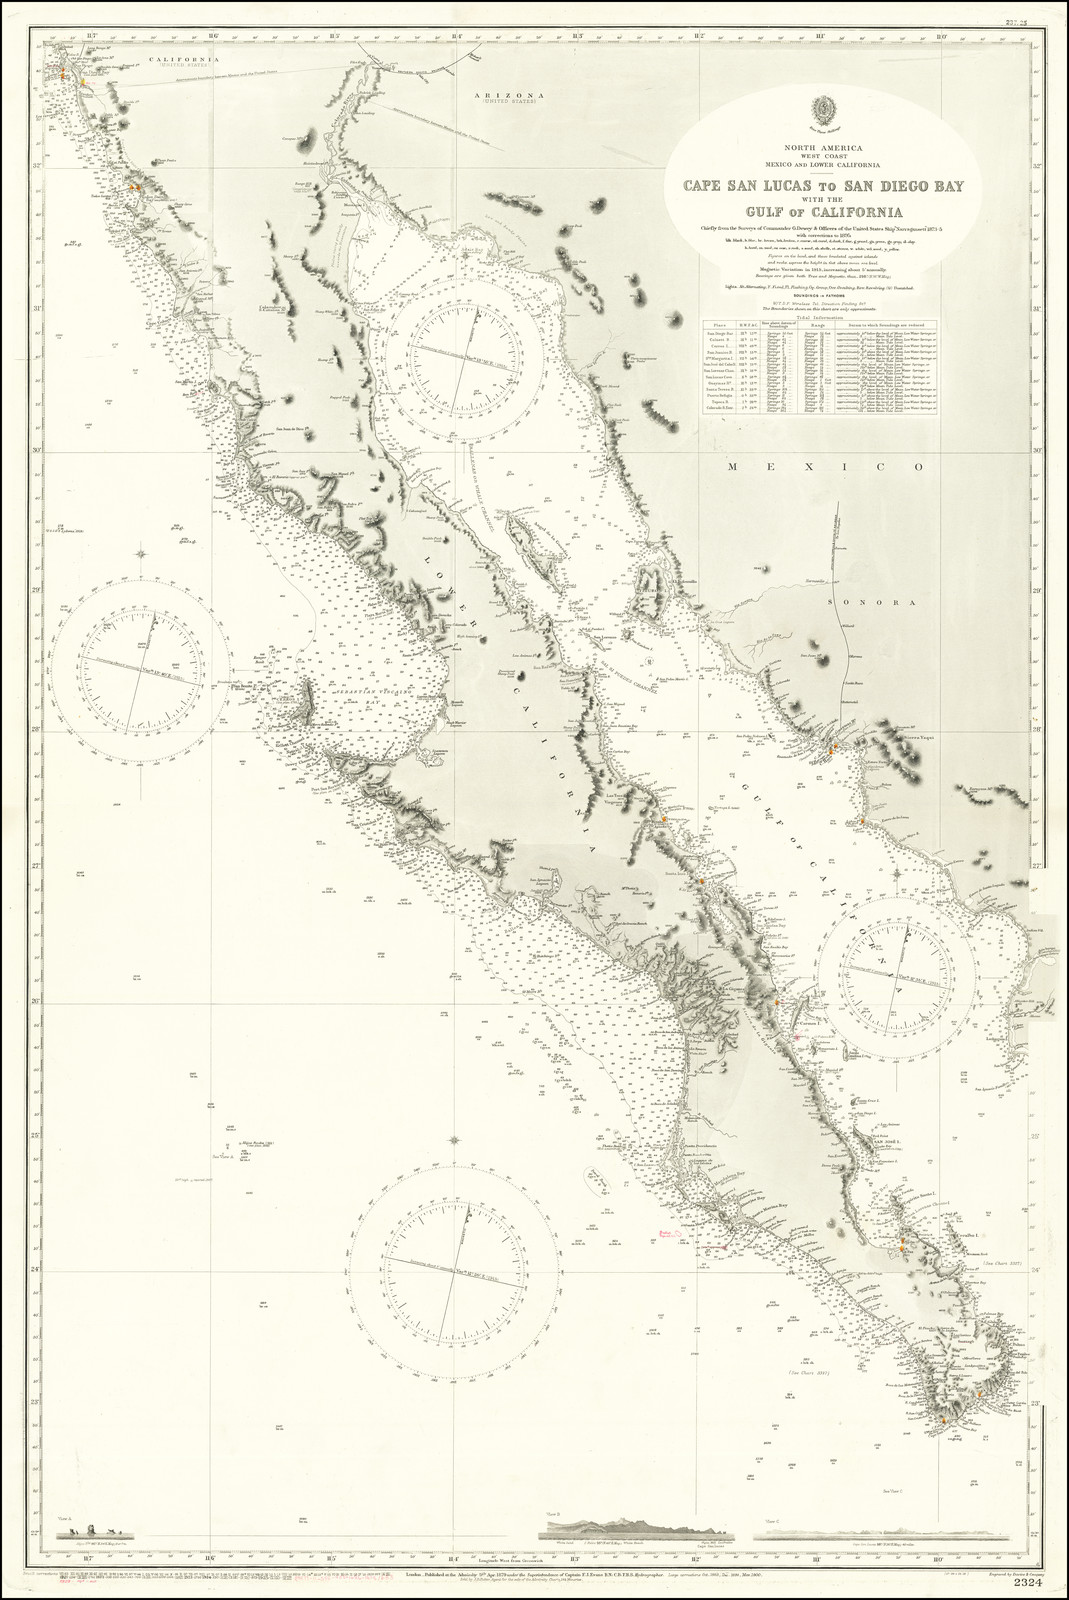 Cape San Lucas to San Diego Bay with the Gulf of California Chiefly from the Surveys of Commander G. Dewey & Officers of the United States Ship Narrangansett 1873-5 with corrections to 1895